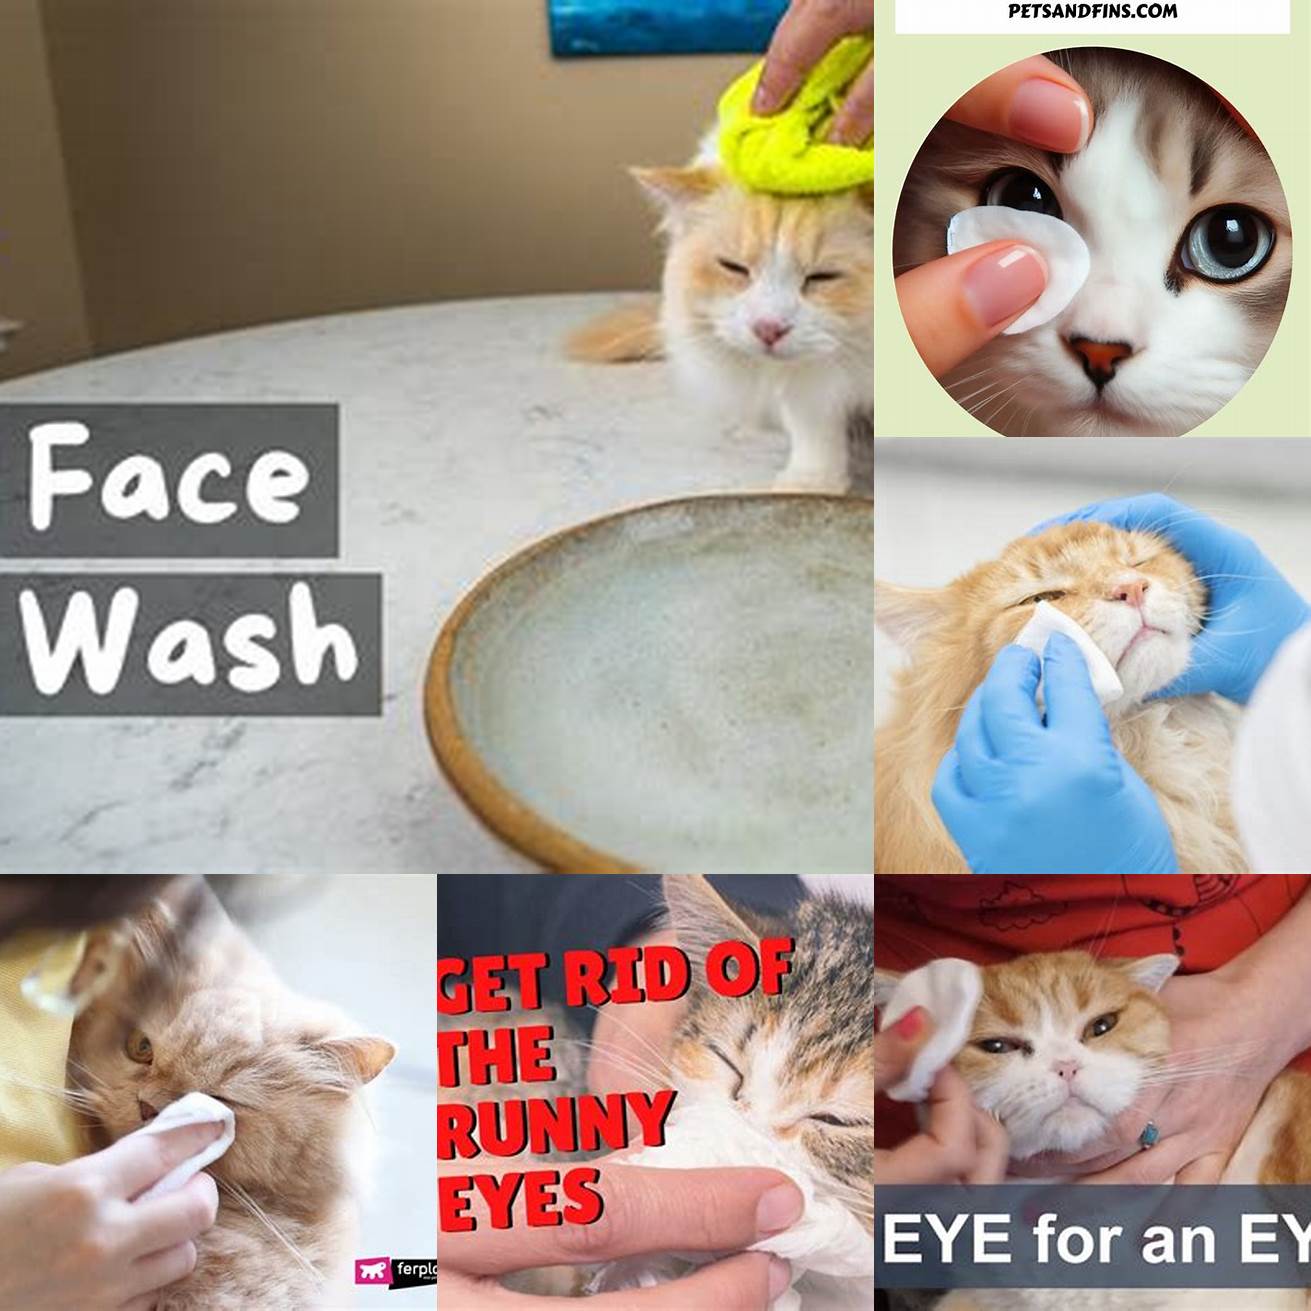 Be Careful When Cleaning Your Cats Eyes